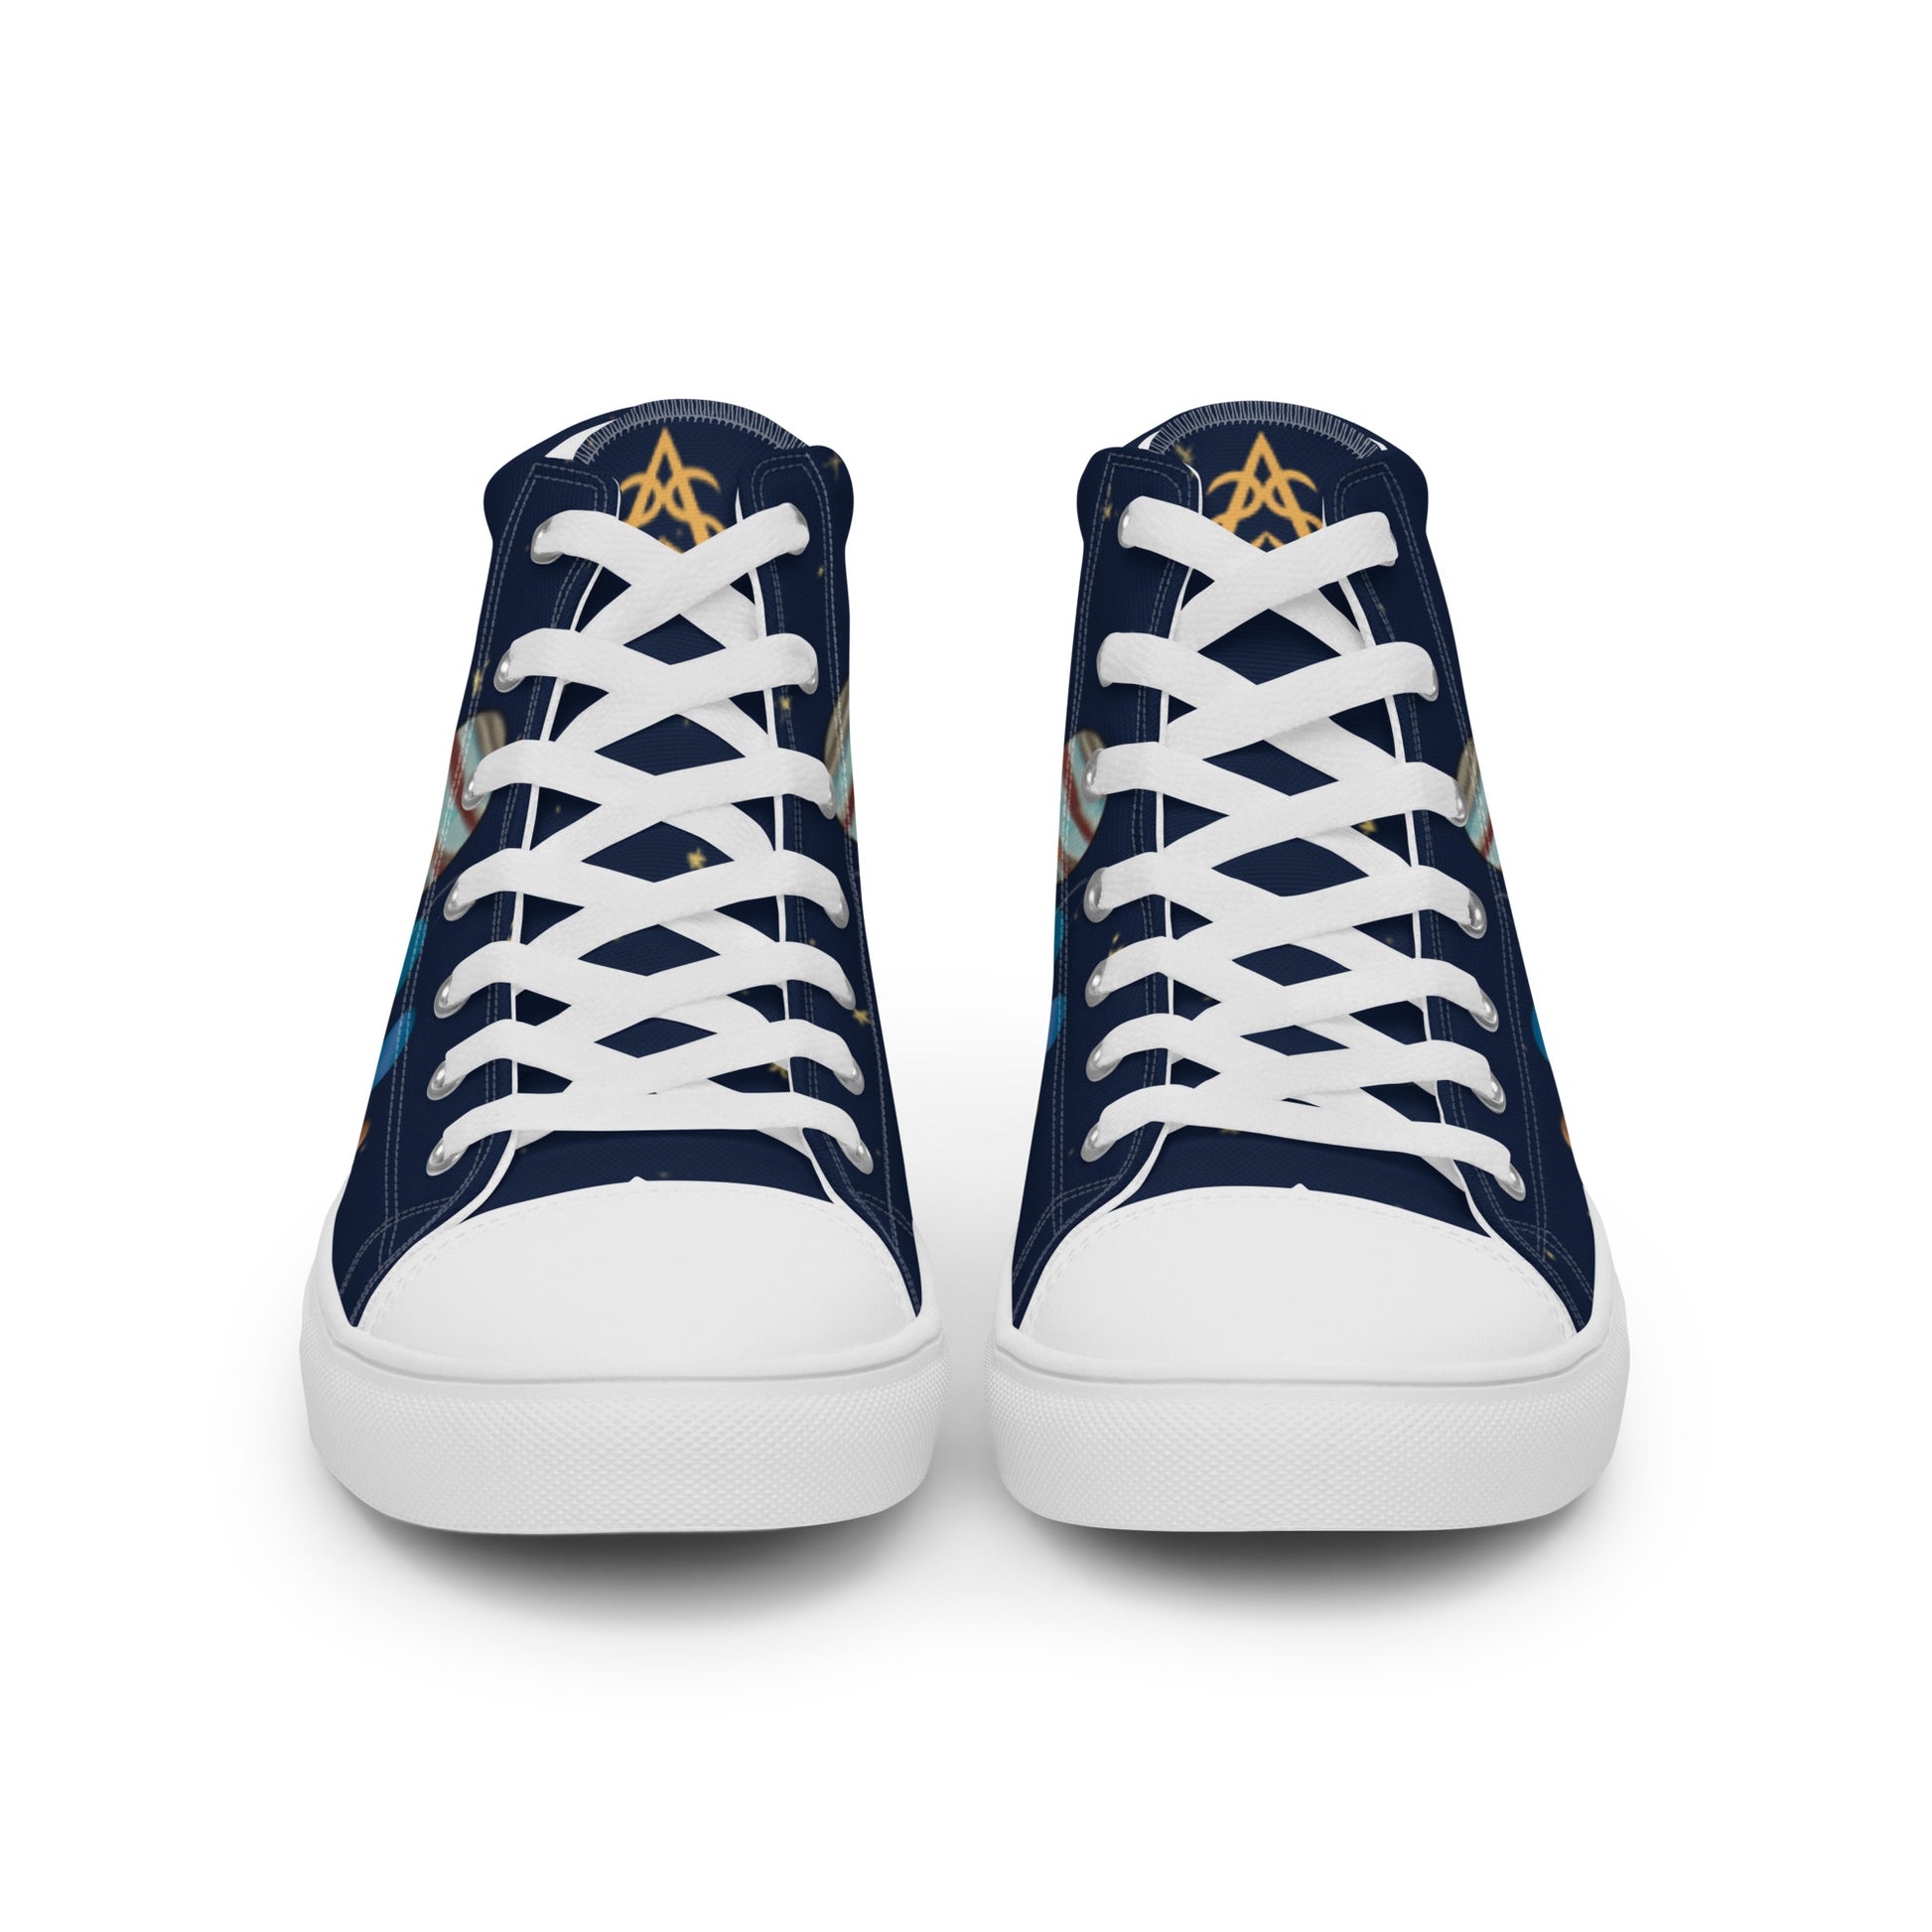 Front view: A pair of high top shoes with painted solar system and starry background with white laces.